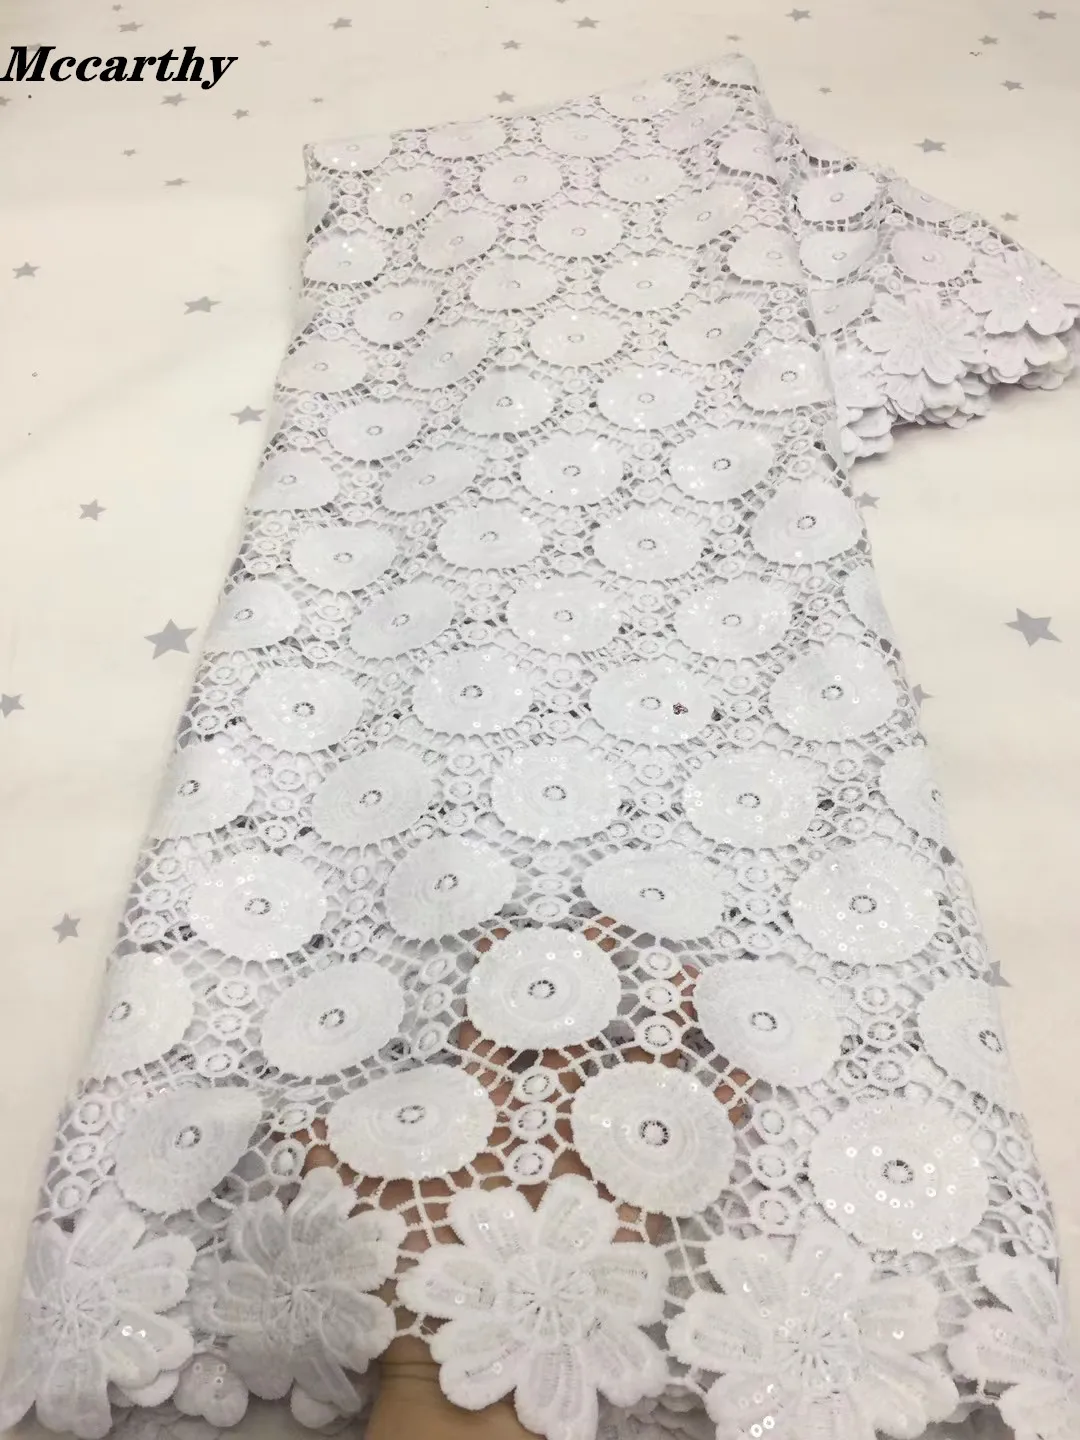 Best-Selling Nigerian Lace Fabrics milk silk With Sequins African Cord Lace Fabrics 2021 Guipure Lace Cotton Material